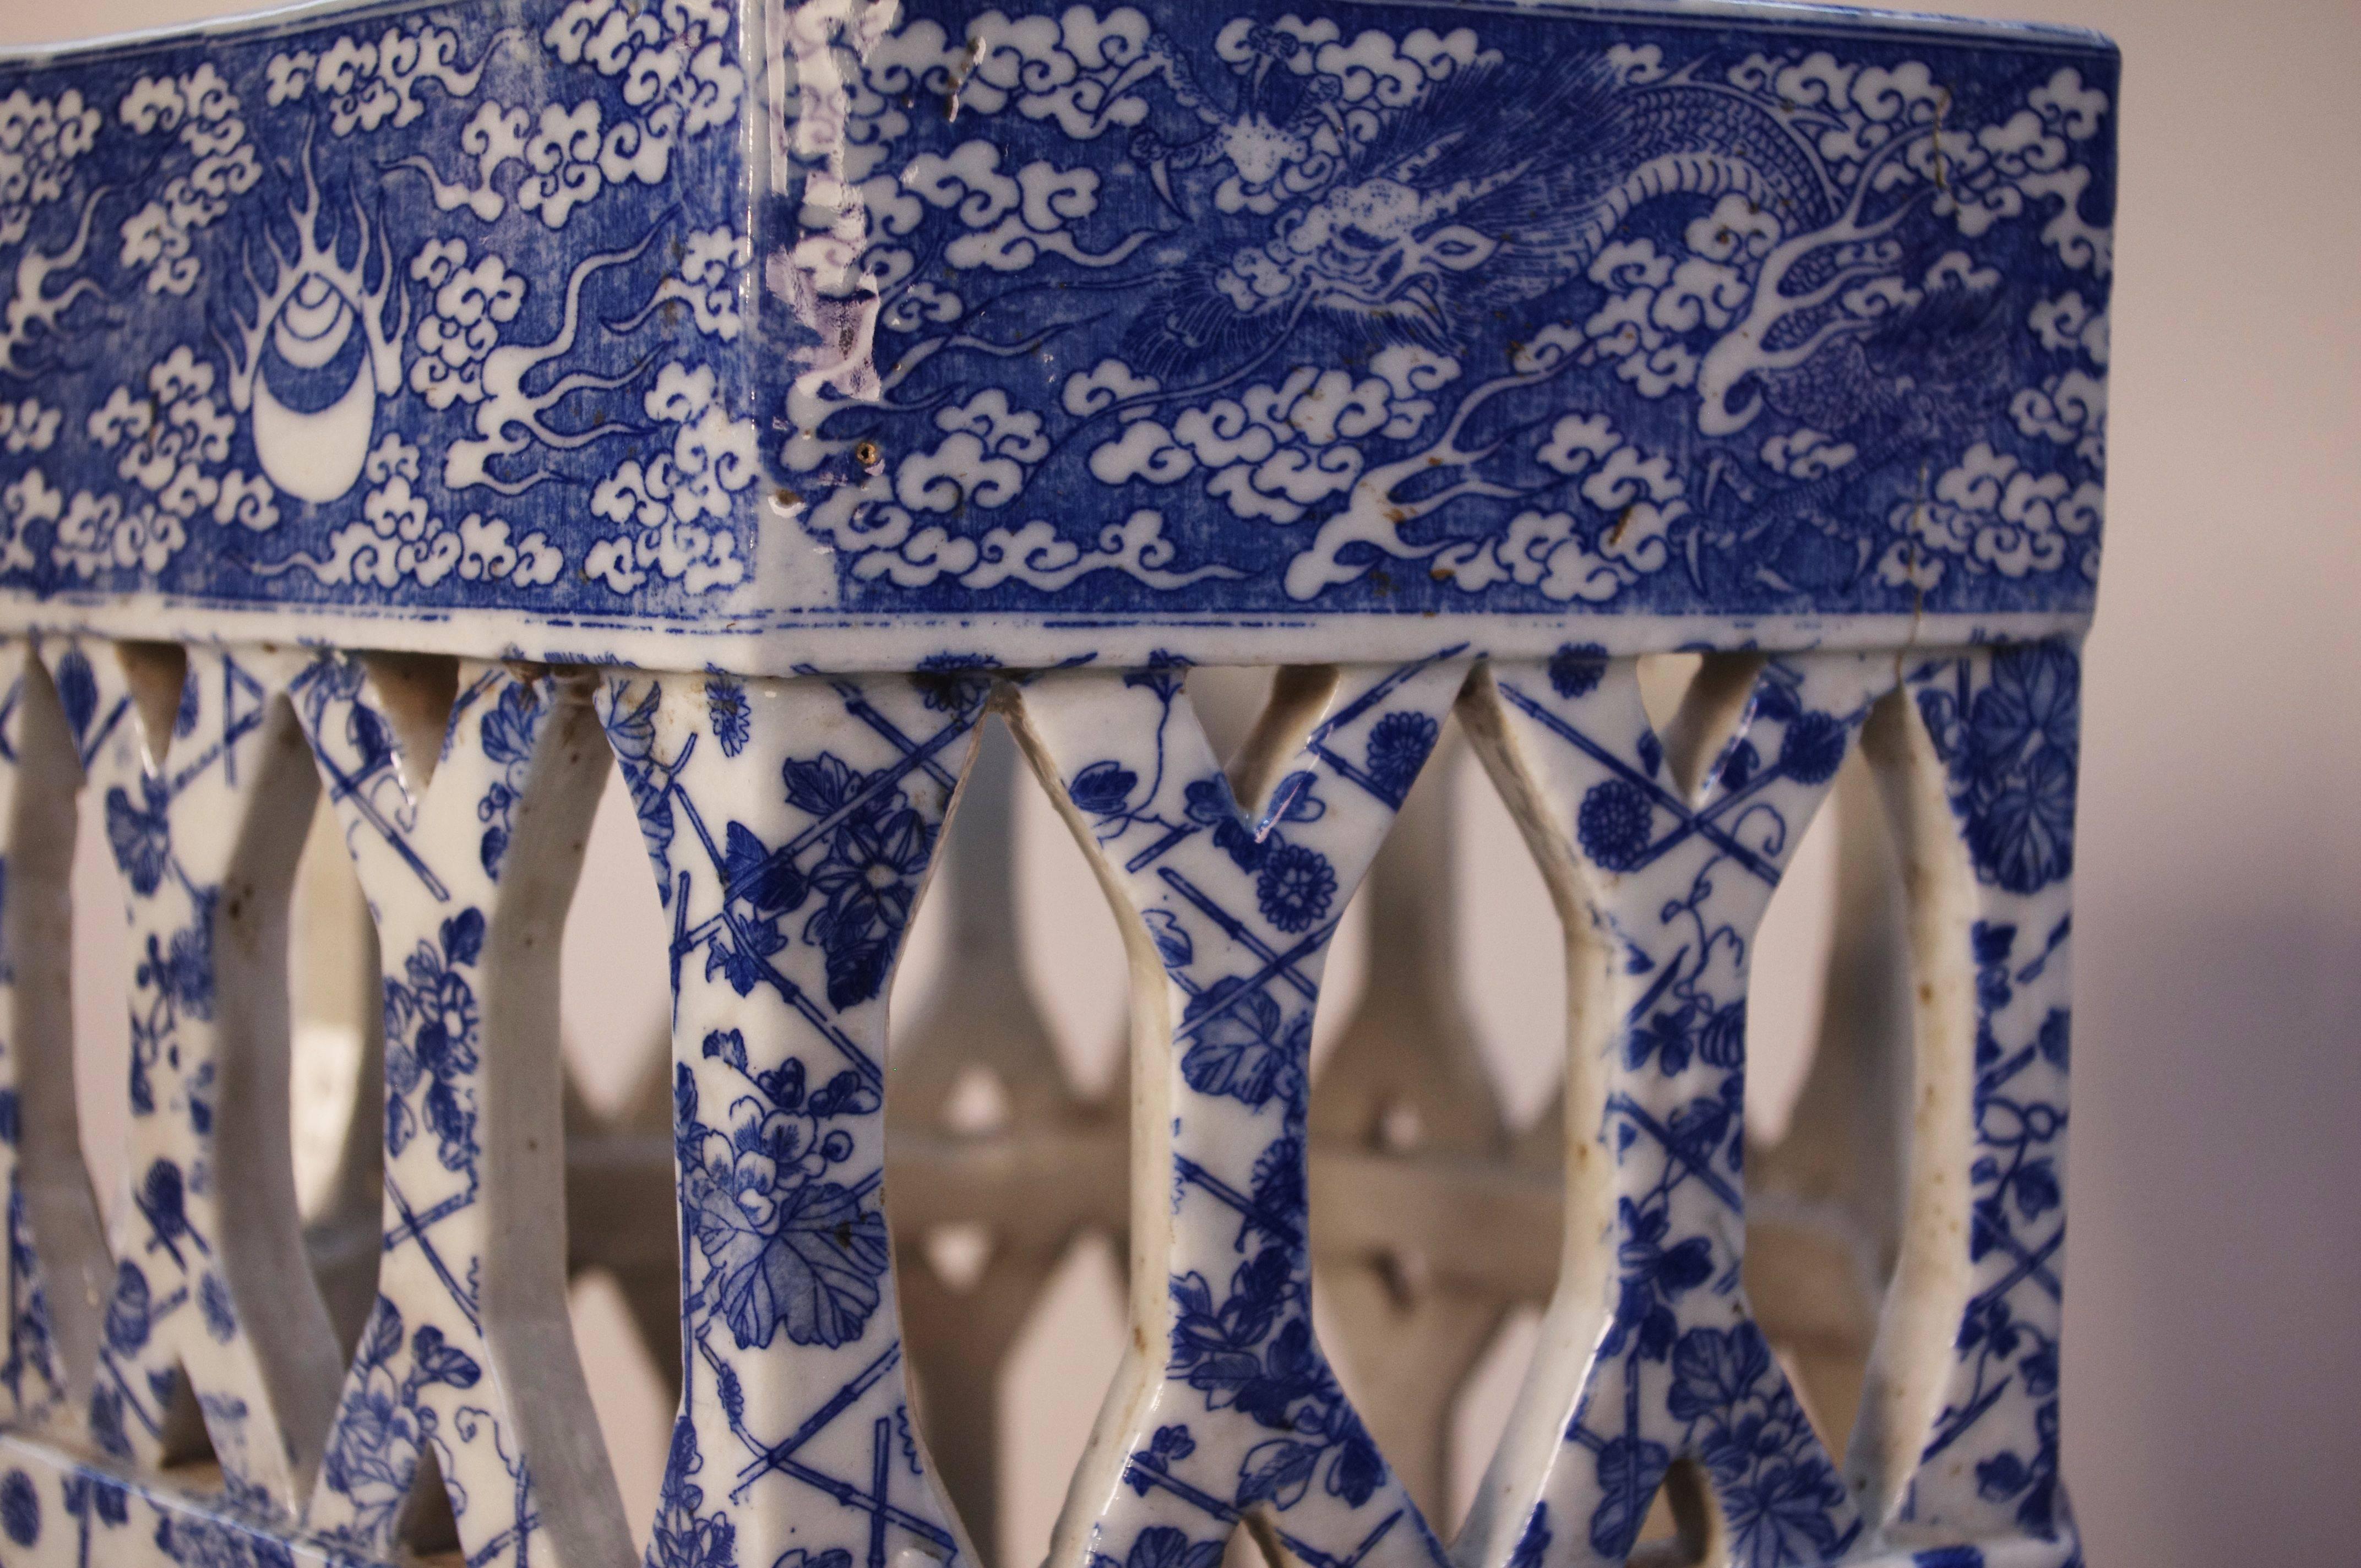 Chinese Export Hexagonal Blue and White Chinese Porcelain Umbrella Stand, circa 1880